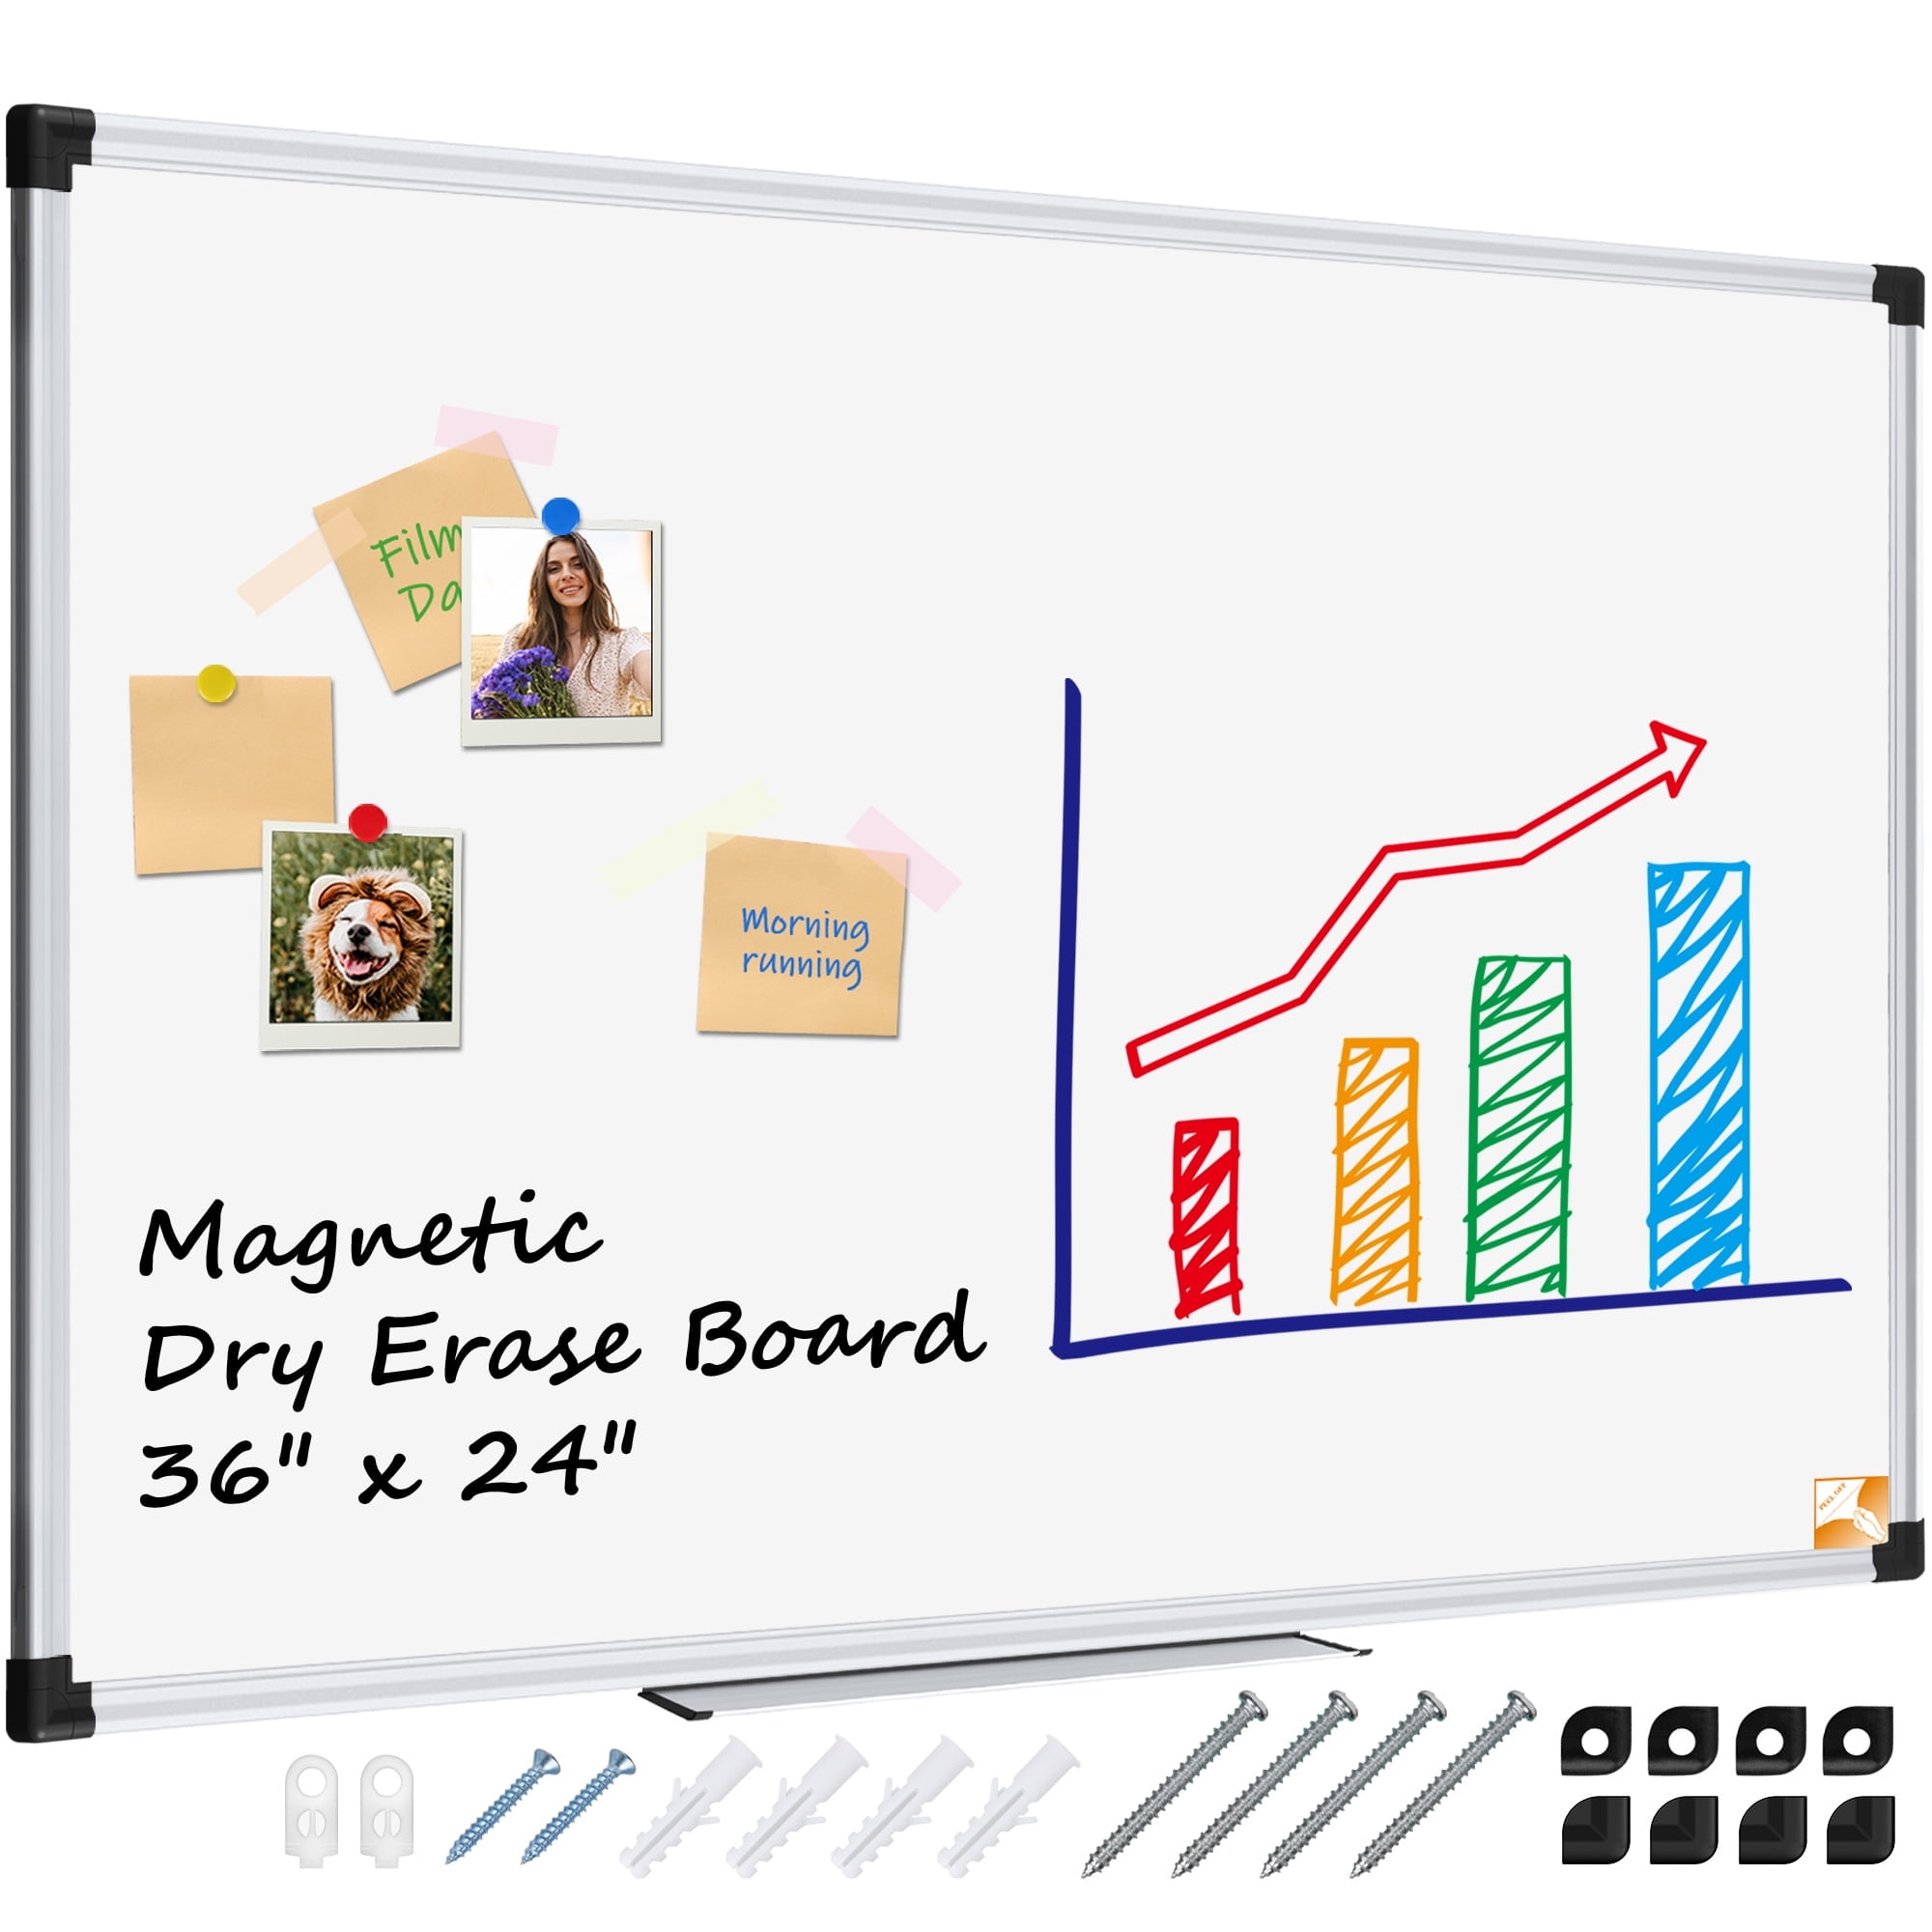 BENTISM 24 x 48 Rolling Magnetic Whiteboard Double-sided Mobile Whiteboard  360 Degree Reversible Rolling Dry Erase Board Height Adjustable with  Lockable Swivel Wheels for Office School Home 